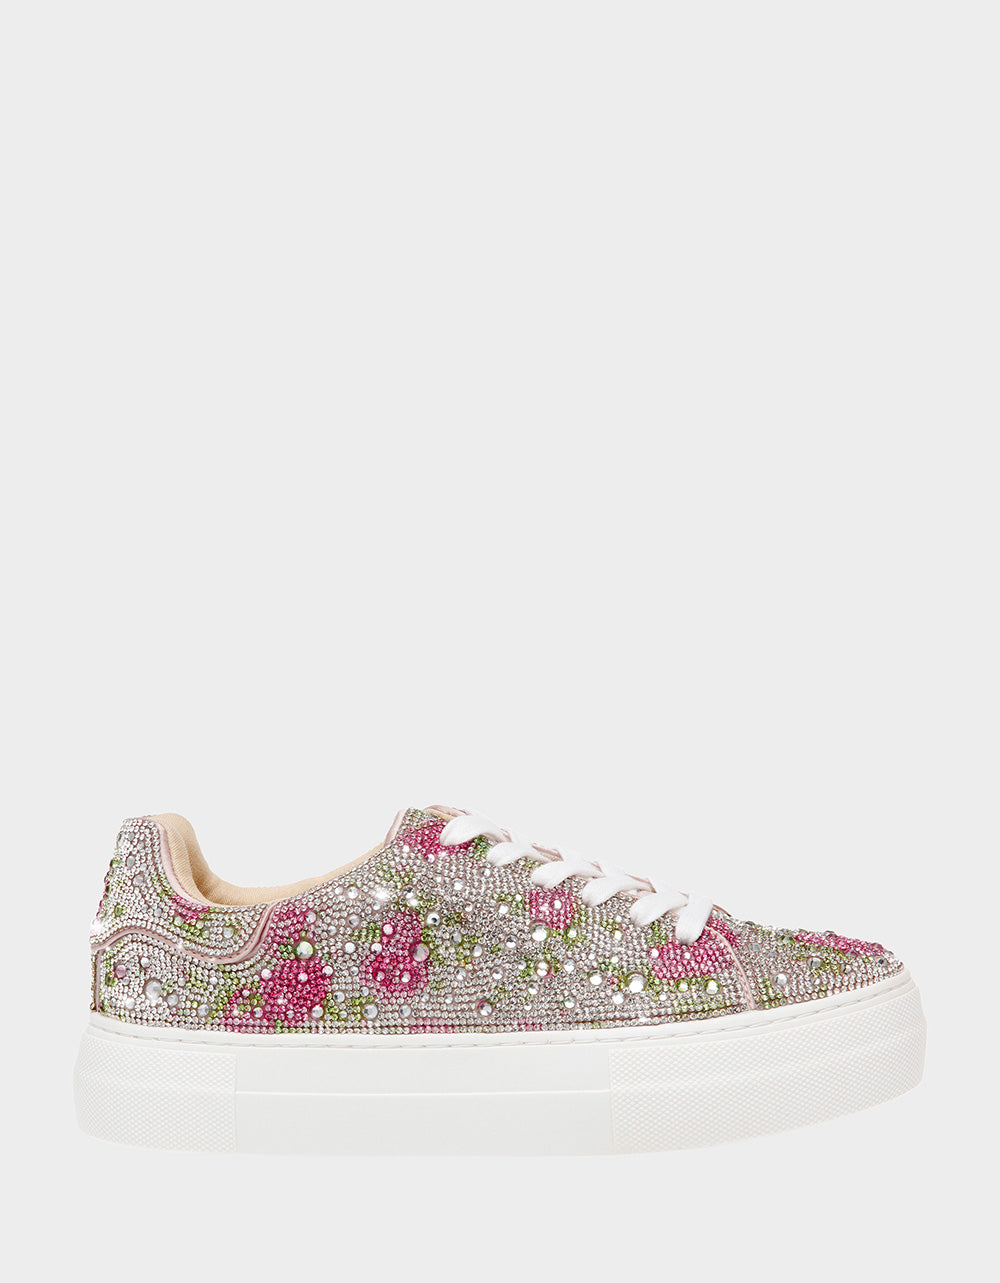 Women's Glitter Tennis Sneakers Floral Dressy Sparkly Sneakers